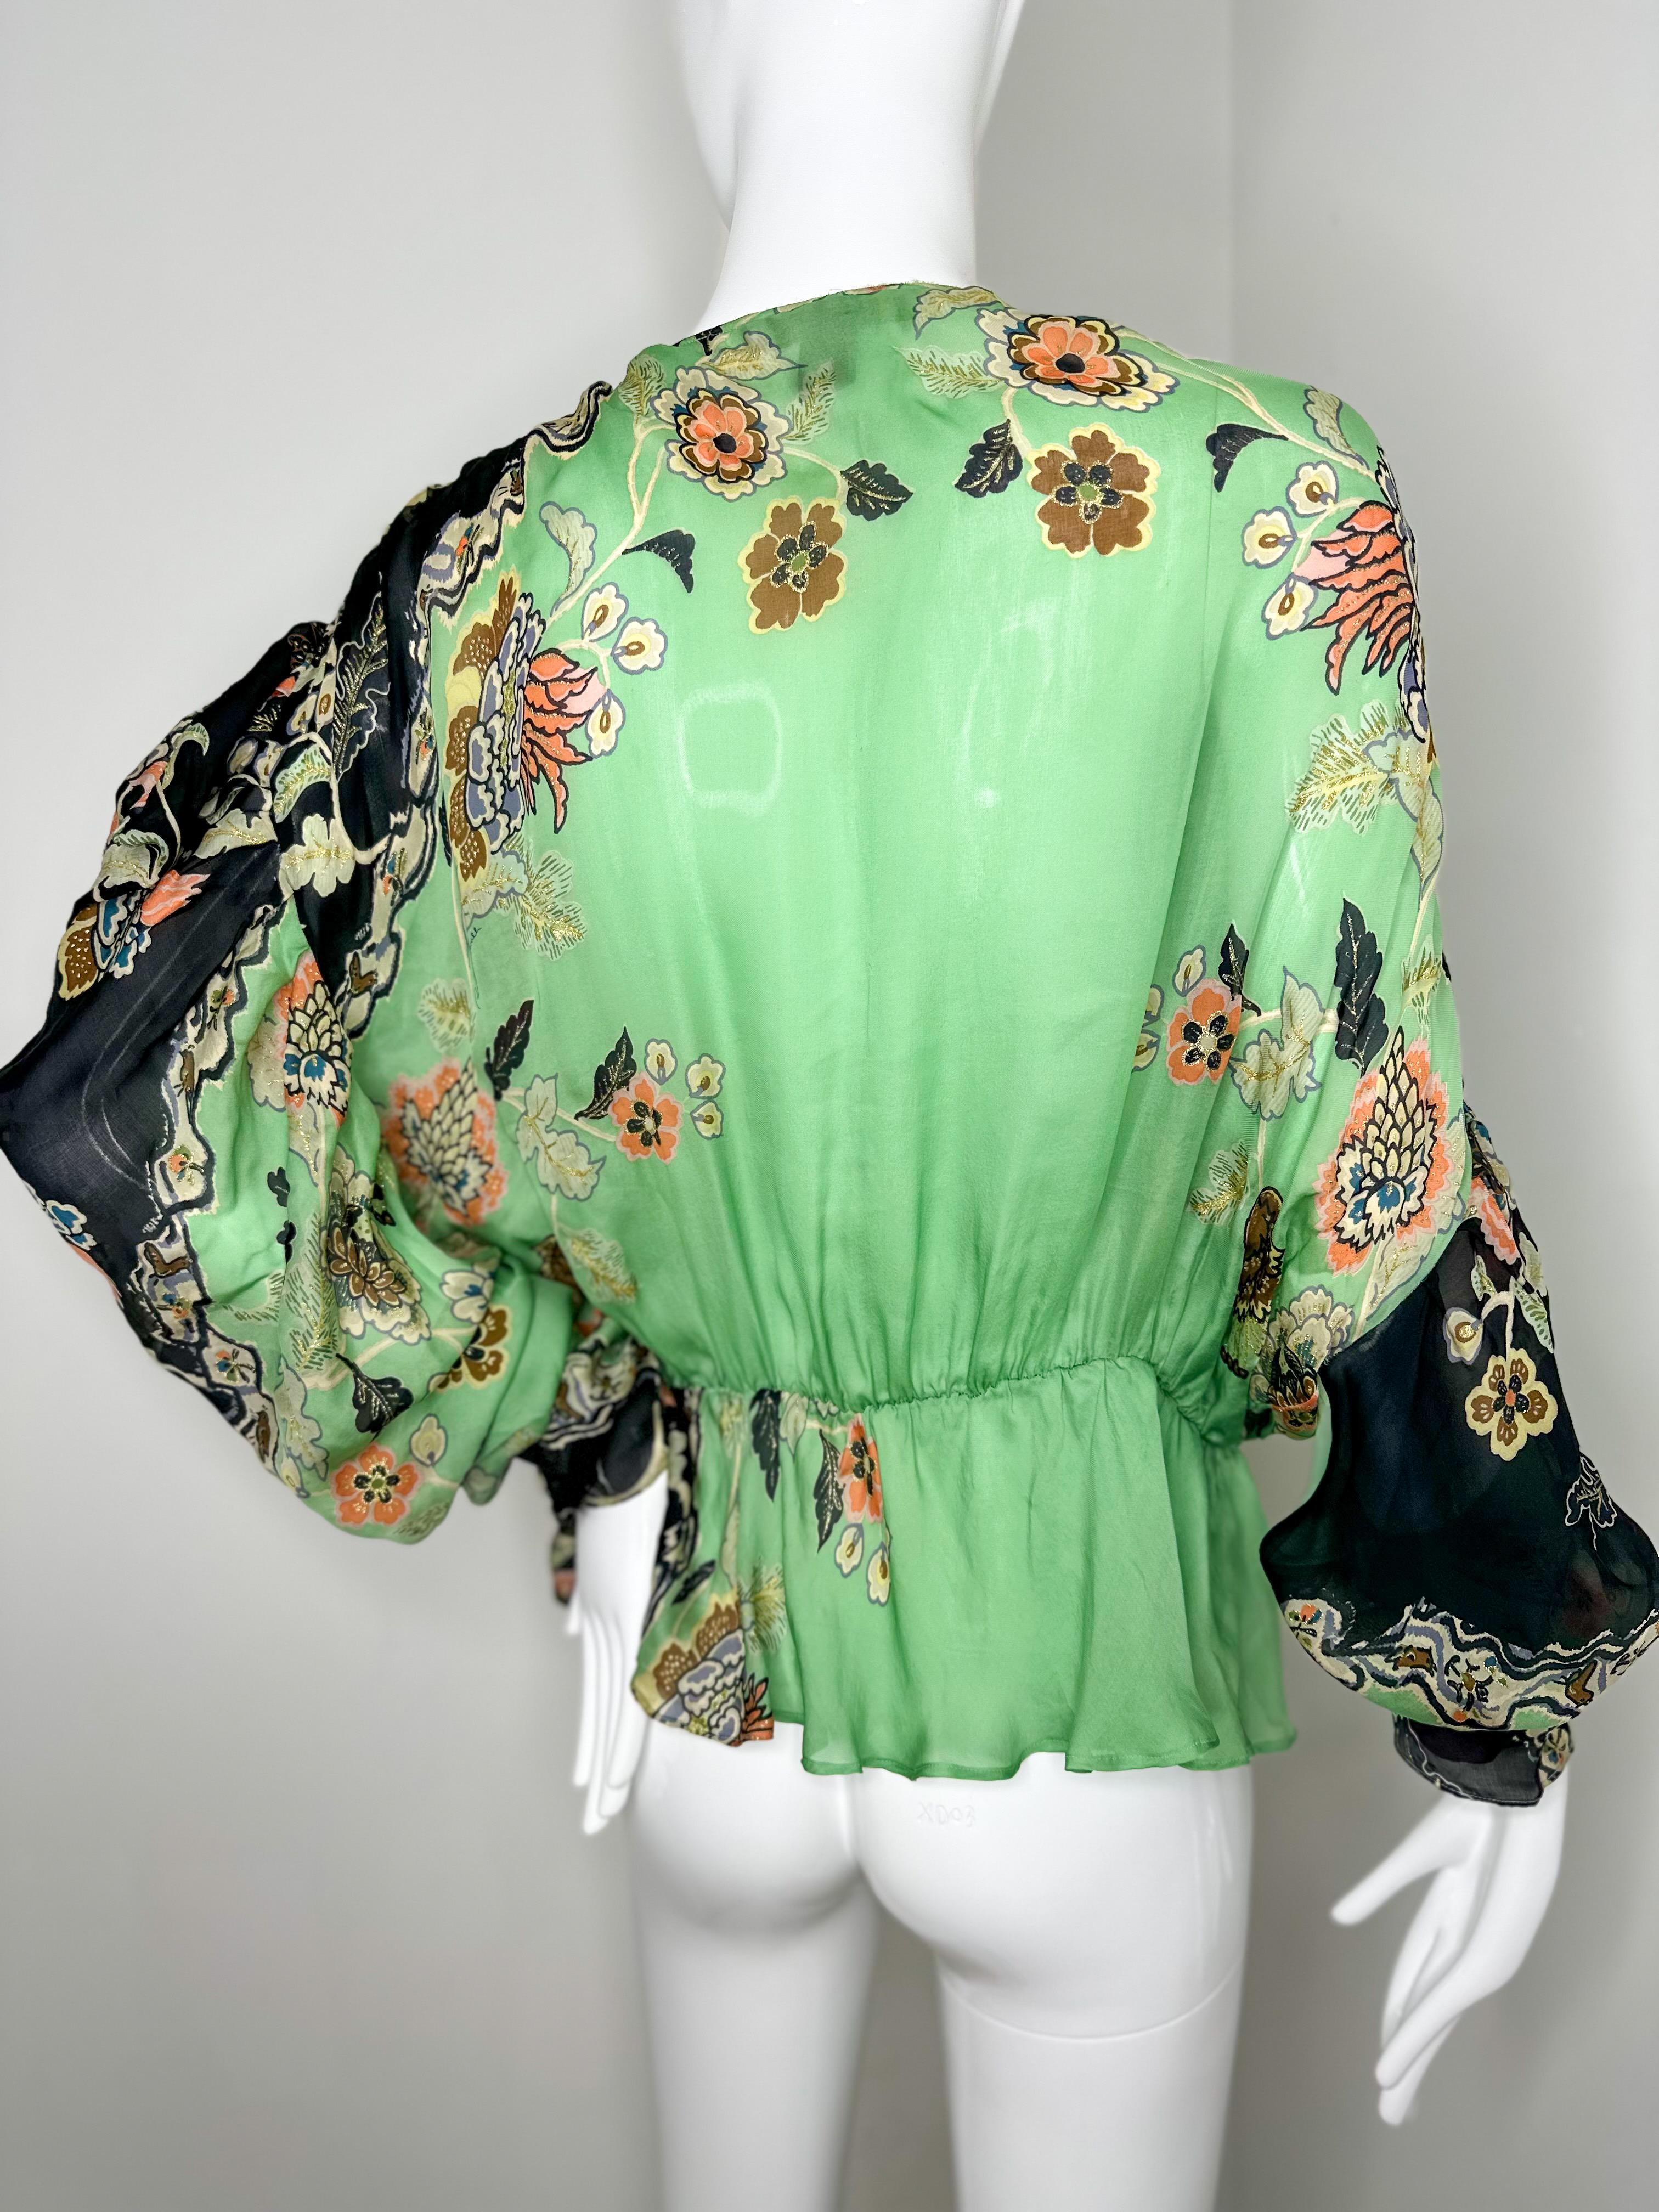 Roberto Cavalli 2003 chinoiserie silk blouse In Good Condition For Sale In Annandale, VA